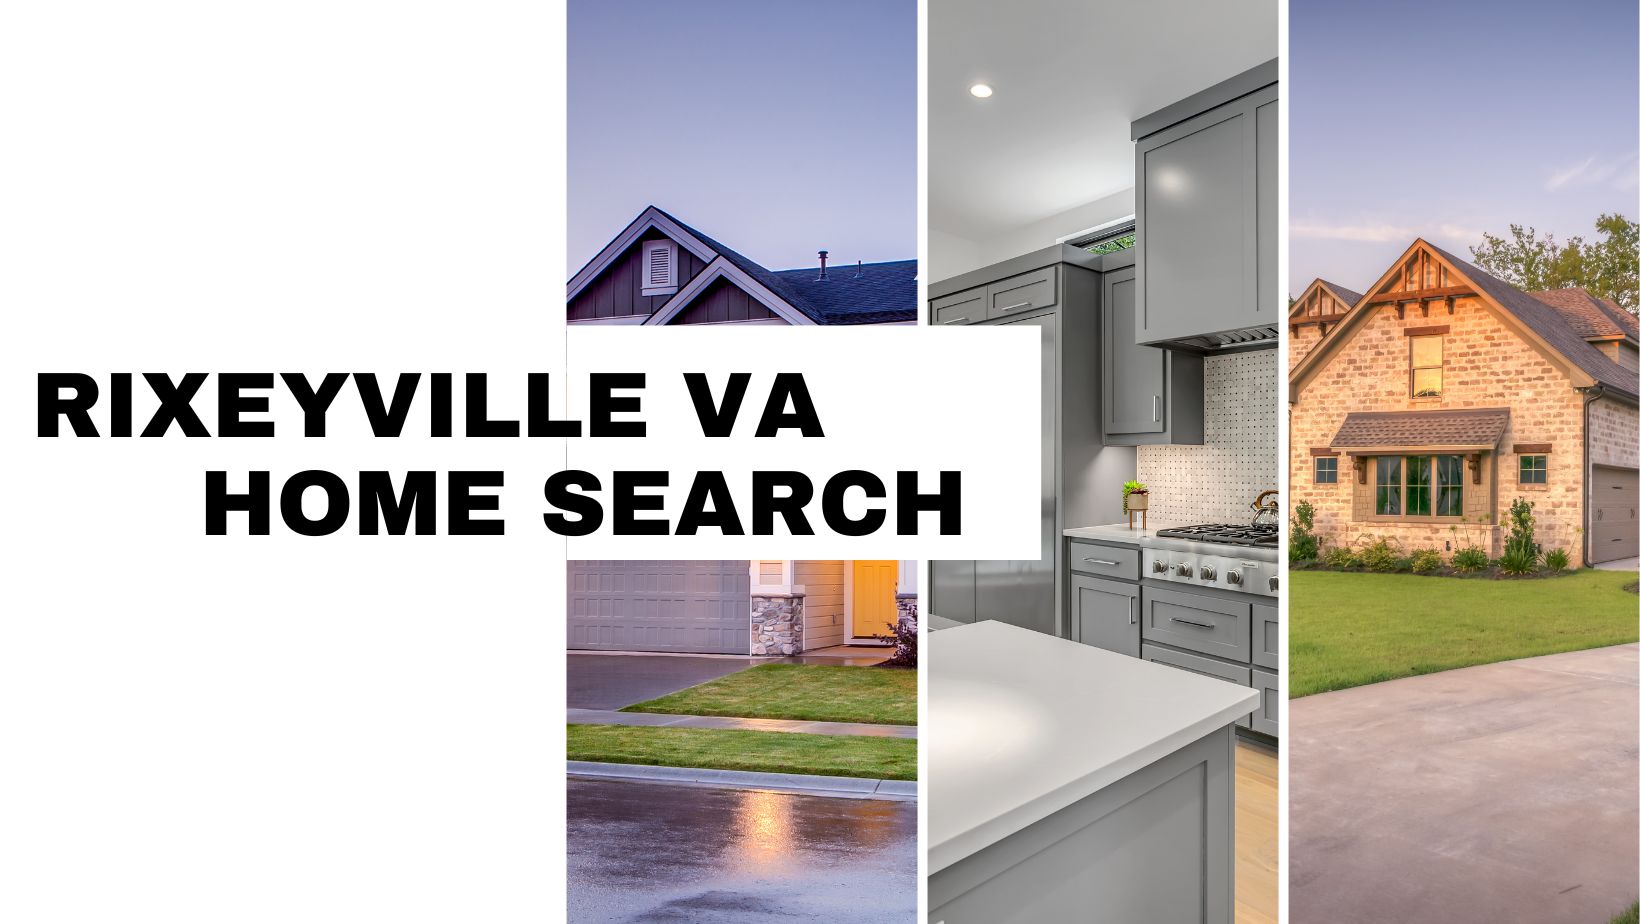 Rixeyville VA Homes for Sale